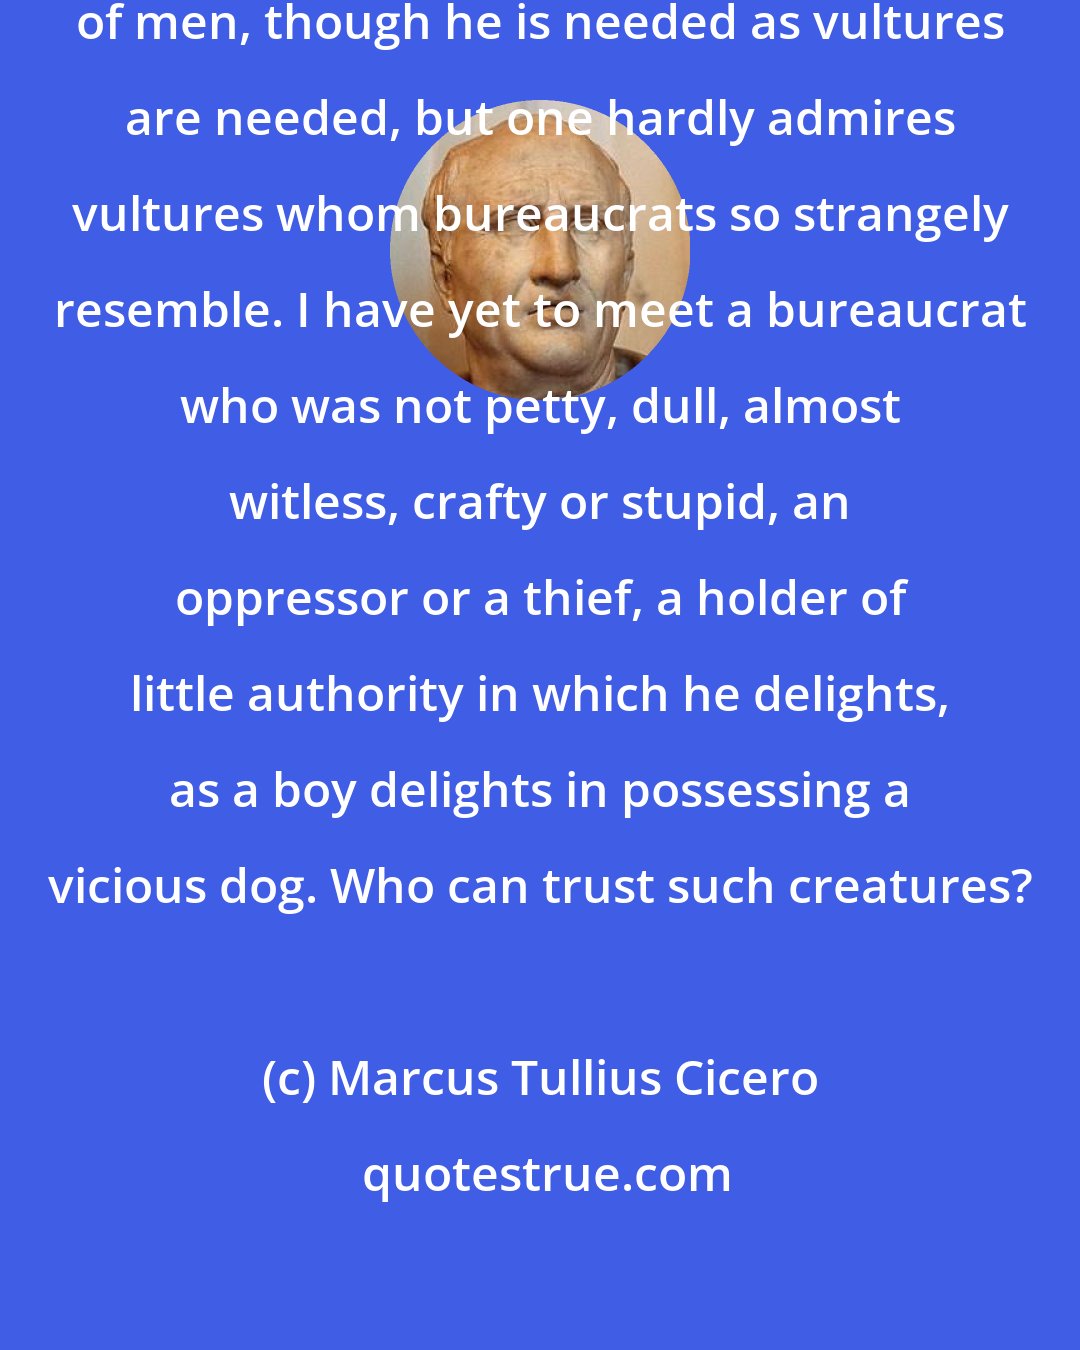 Marcus Tullius Cicero: A bureaucrat is the most despicable of men, though he is needed as vultures are needed, but one hardly admires vultures whom bureaucrats so strangely resemble. I have yet to meet a bureaucrat who was not petty, dull, almost witless, crafty or stupid, an oppressor or a thief, a holder of little authority in which he delights, as a boy delights in possessing a vicious dog. Who can trust such creatures?